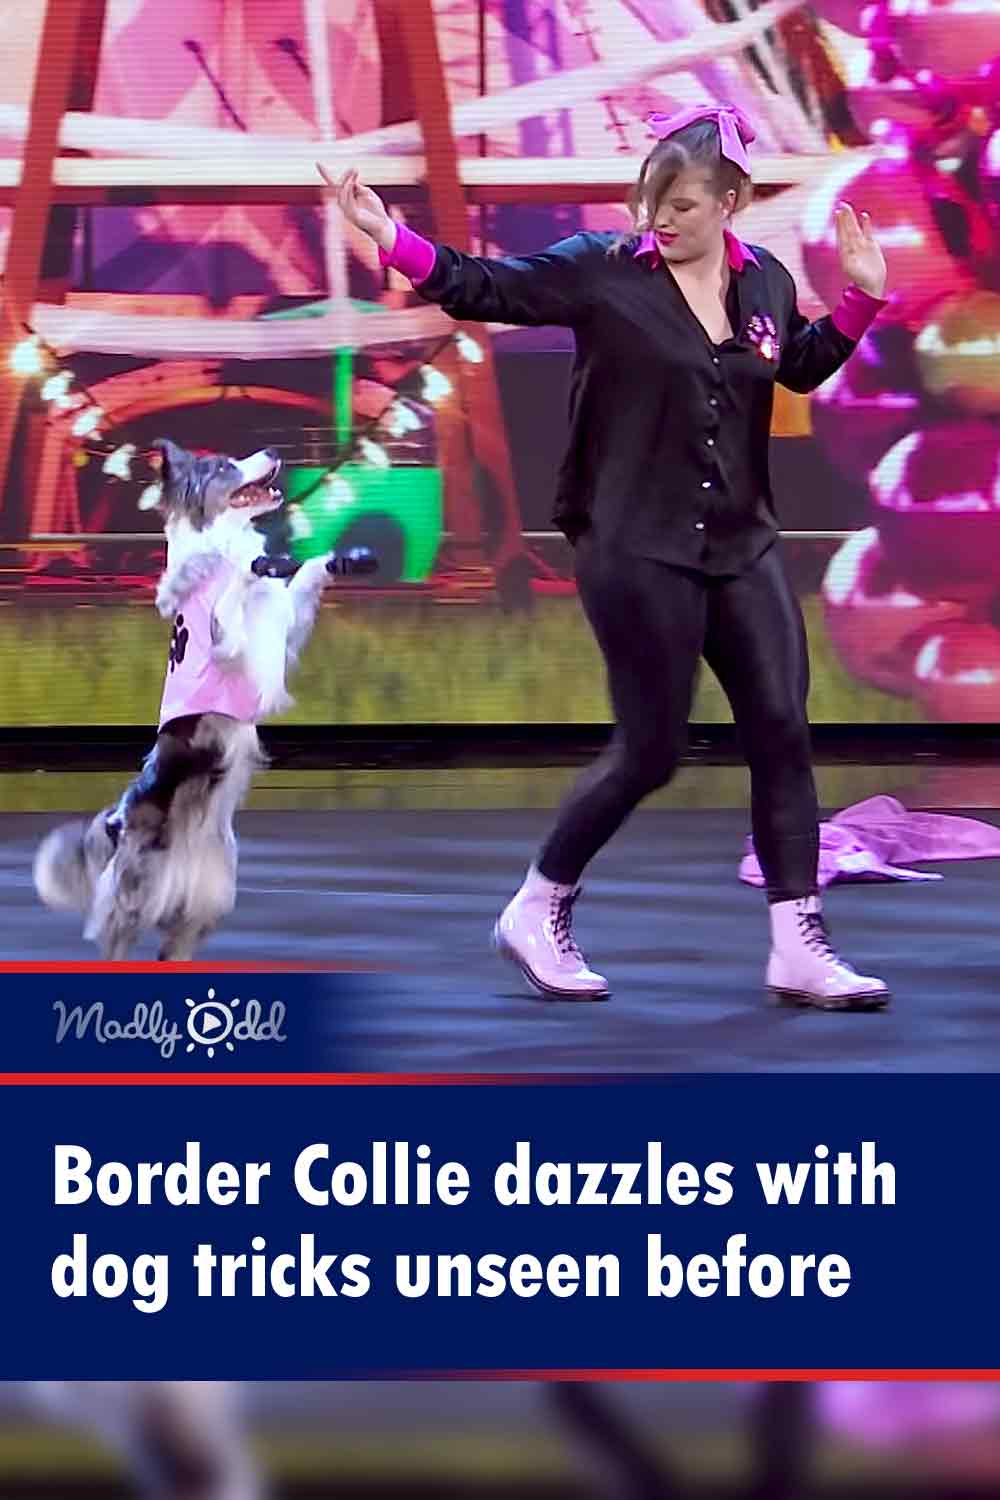 Border Collie dazzles with dog tricks unseen before